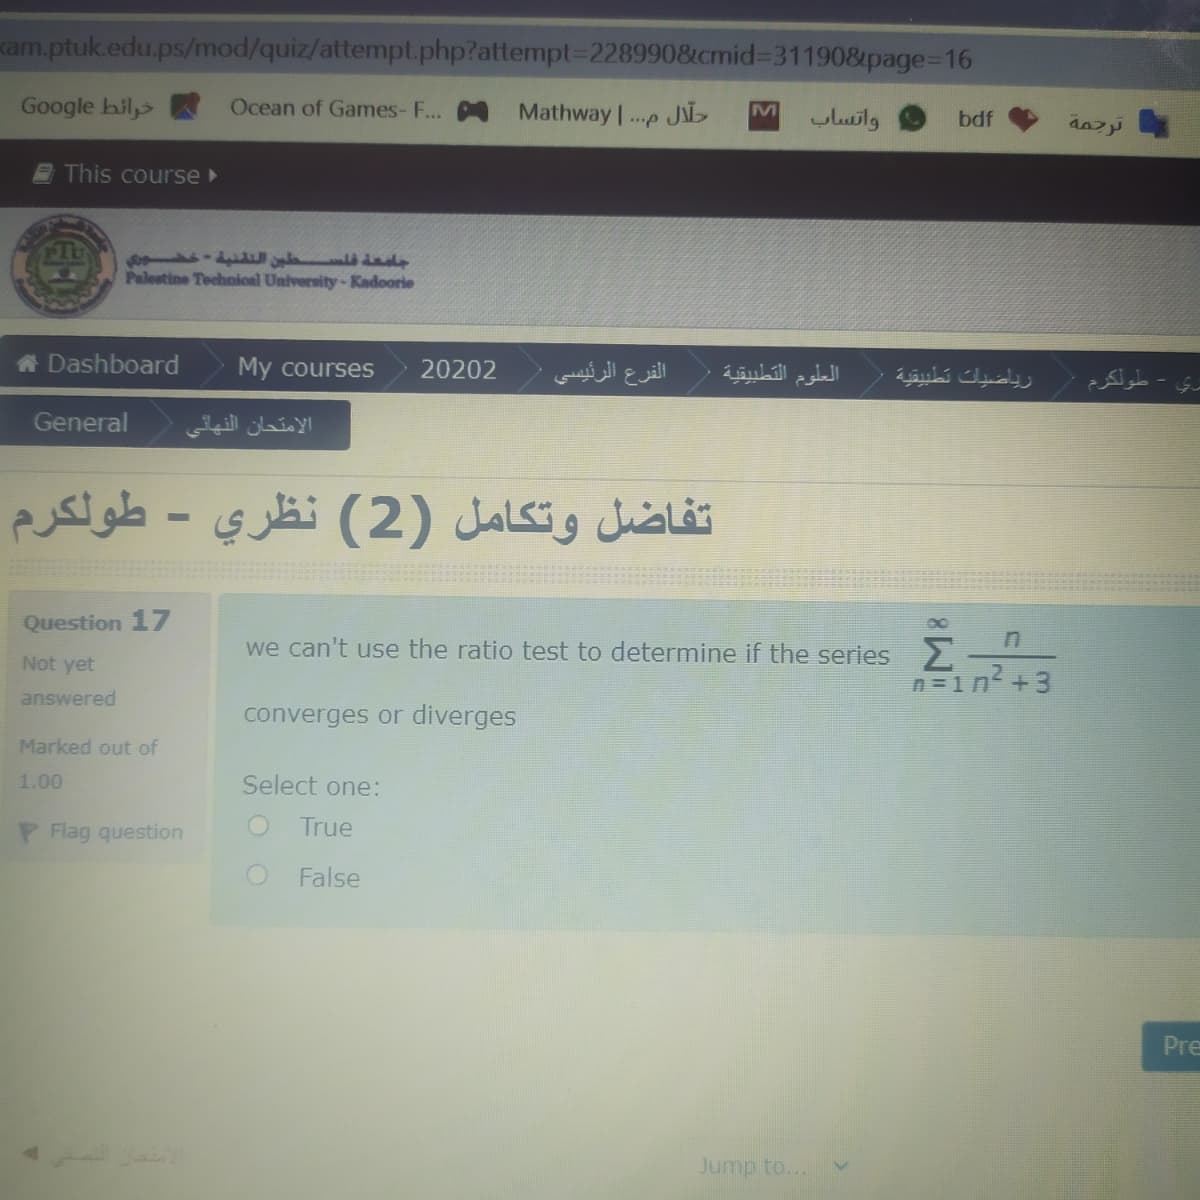 kam.ptuk.edu.ps/mod/quiz/attempt.php?attempt%3D228990&cmid%3D31190&page=D16
Google hil,>
Ocean of Games- F...
Mathway .p JL
M
واتساب
bdf
This course
f la d
Palestine Technical University-Kadoorie
A Dashboard
My courses
20202
الفرع الرئيسی
العلوم التطبيقية
بري - طُولكرم
رياضيات تطيقية
General
الامتحان النهائي
تفاضل وتكامل )2( نظري - طولكرم
Question 17
we can't use the ratio test to determine if the series
Not yet
n =1n +3
answered
converges or diverges
Marked out of
1.00
Select one:
P Flag question
True
False
Pre
Jump to...
